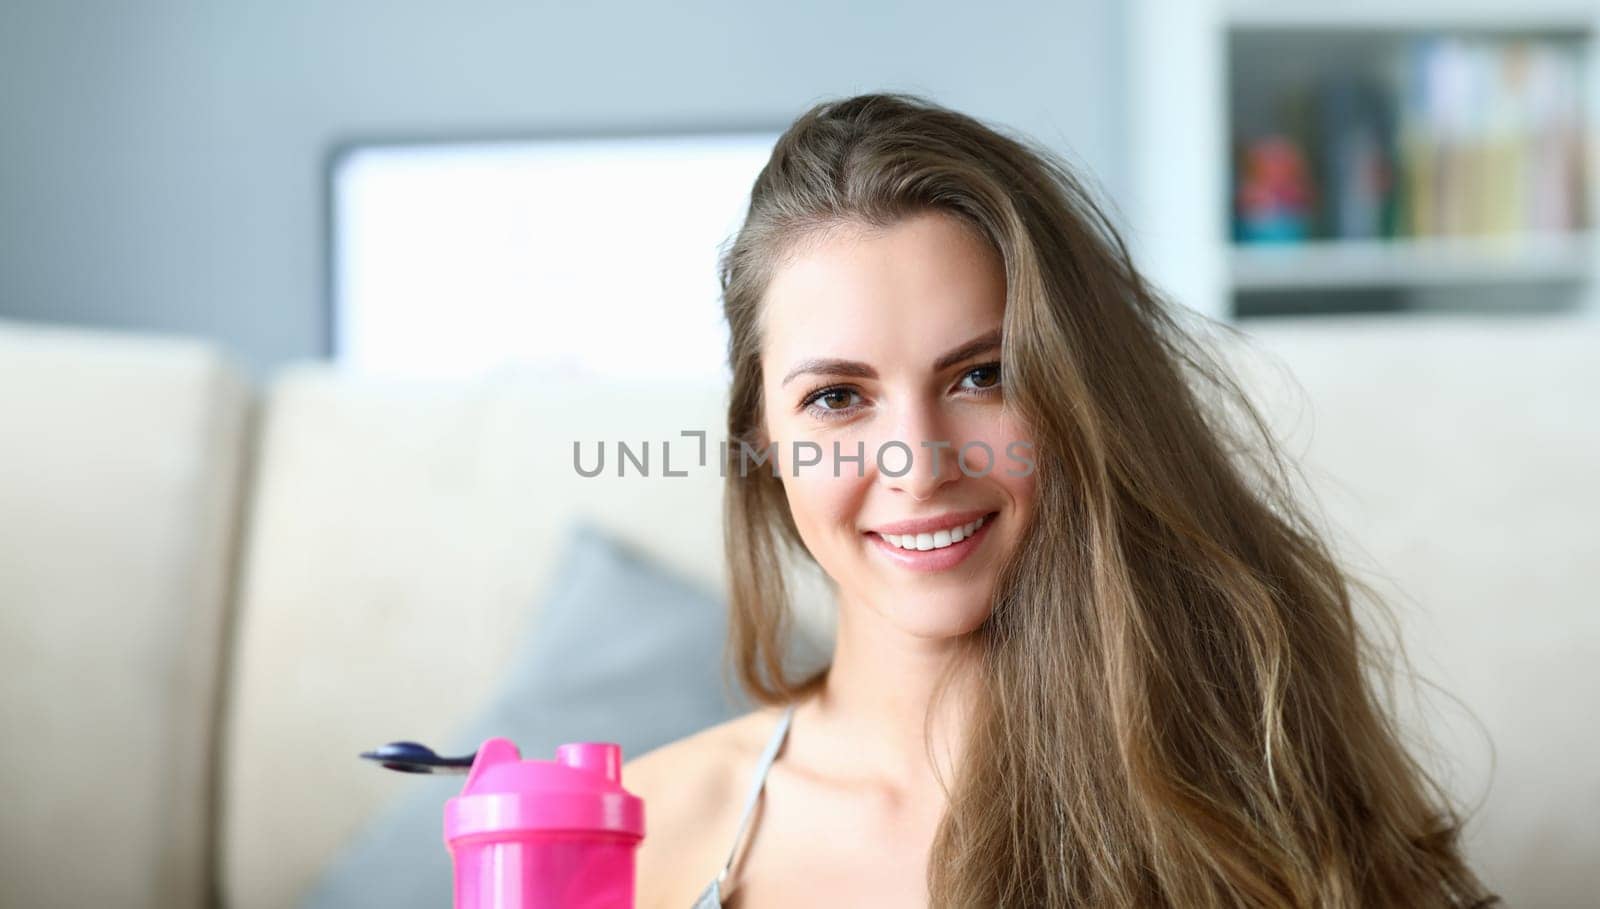 Girl drinks water from bottle prevent dehydration. Woman burns fat and training forms figure. Girl is preparing for exercises, weight loss marathon. Active lifestyle to maintain good health.